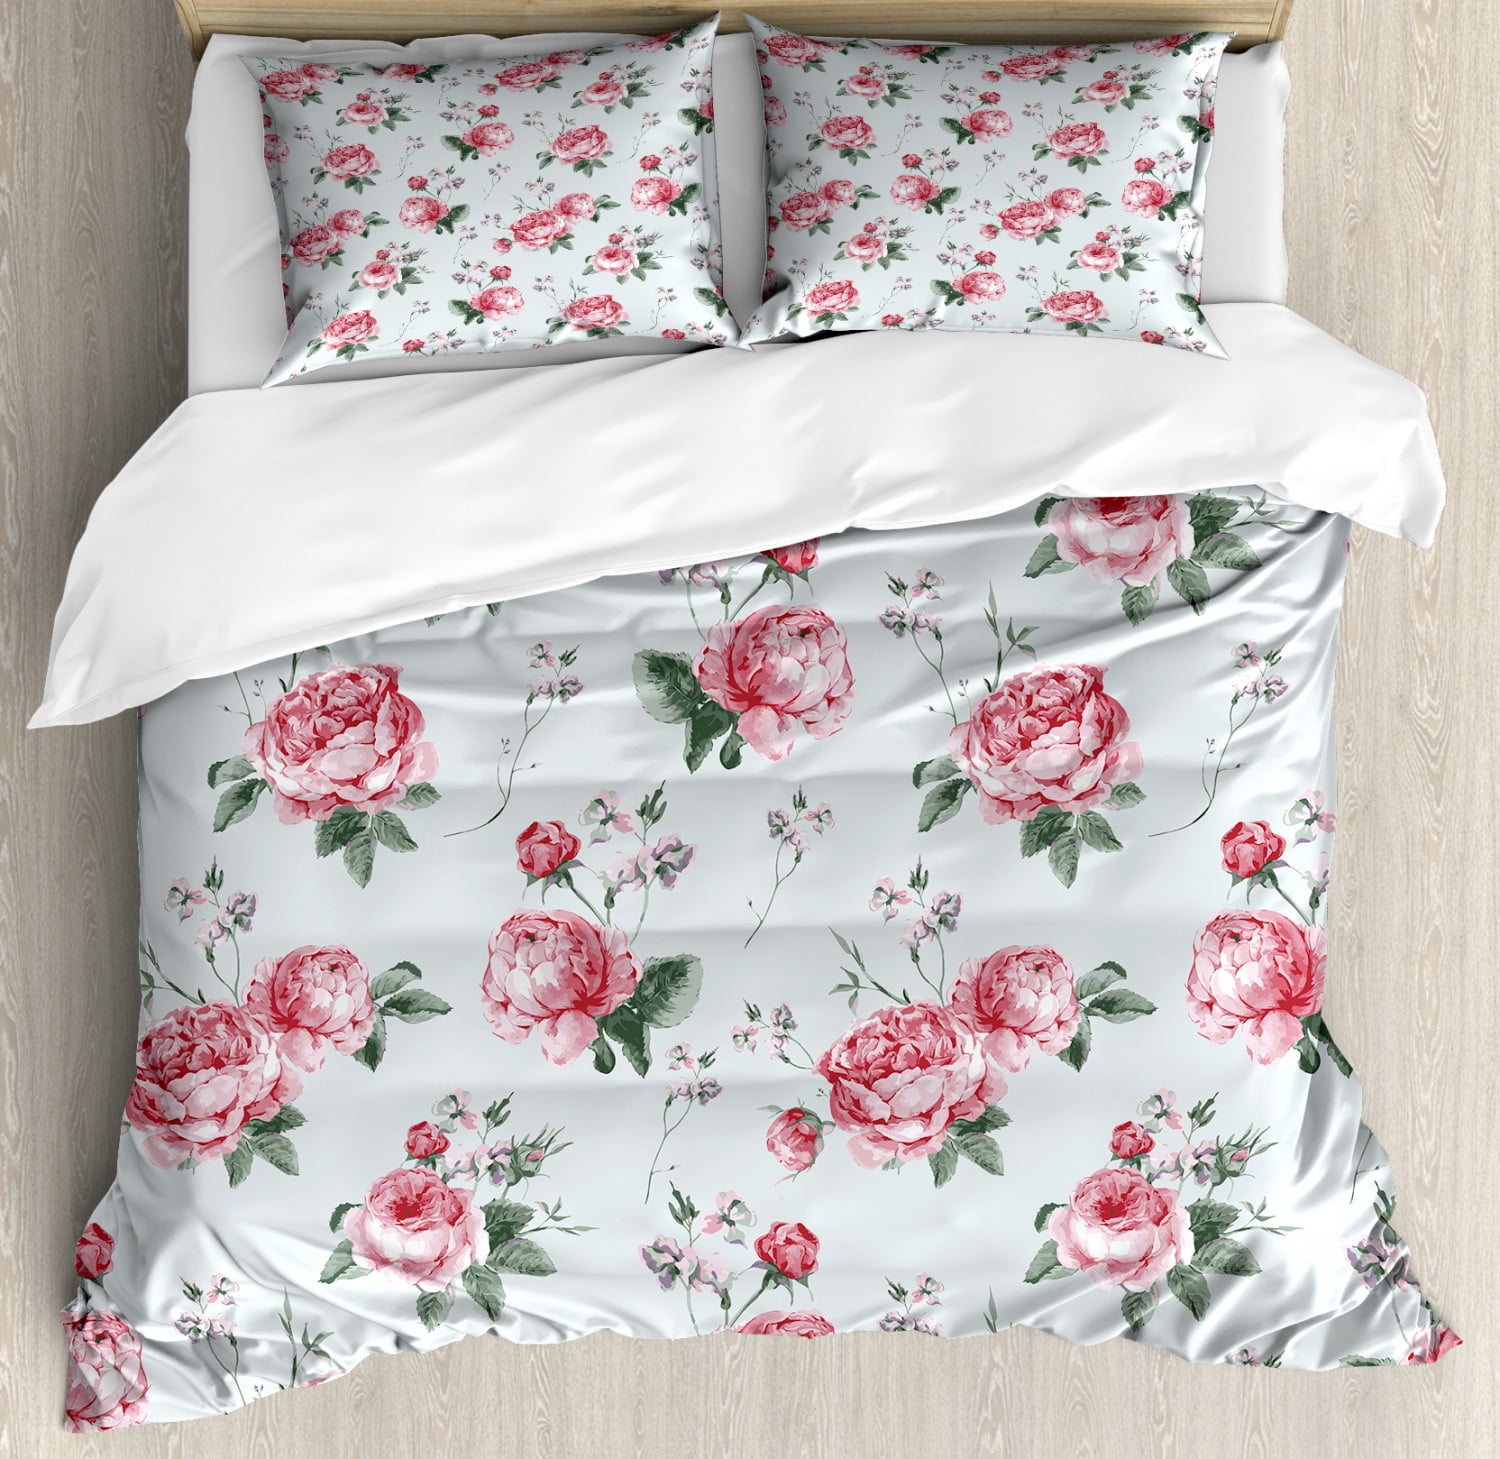 escaleren Zonsverduistering Bijwerken Rose Duvet Cover Set King Size, Blooming English Rose Watercolor Painting  Style Garden Shabby Chic Wild Flowers, Decorative 3 Piece Bedding Set with  2 Pillow Shams, Reseda Green Pink, by Ambesonne - Walmart.com